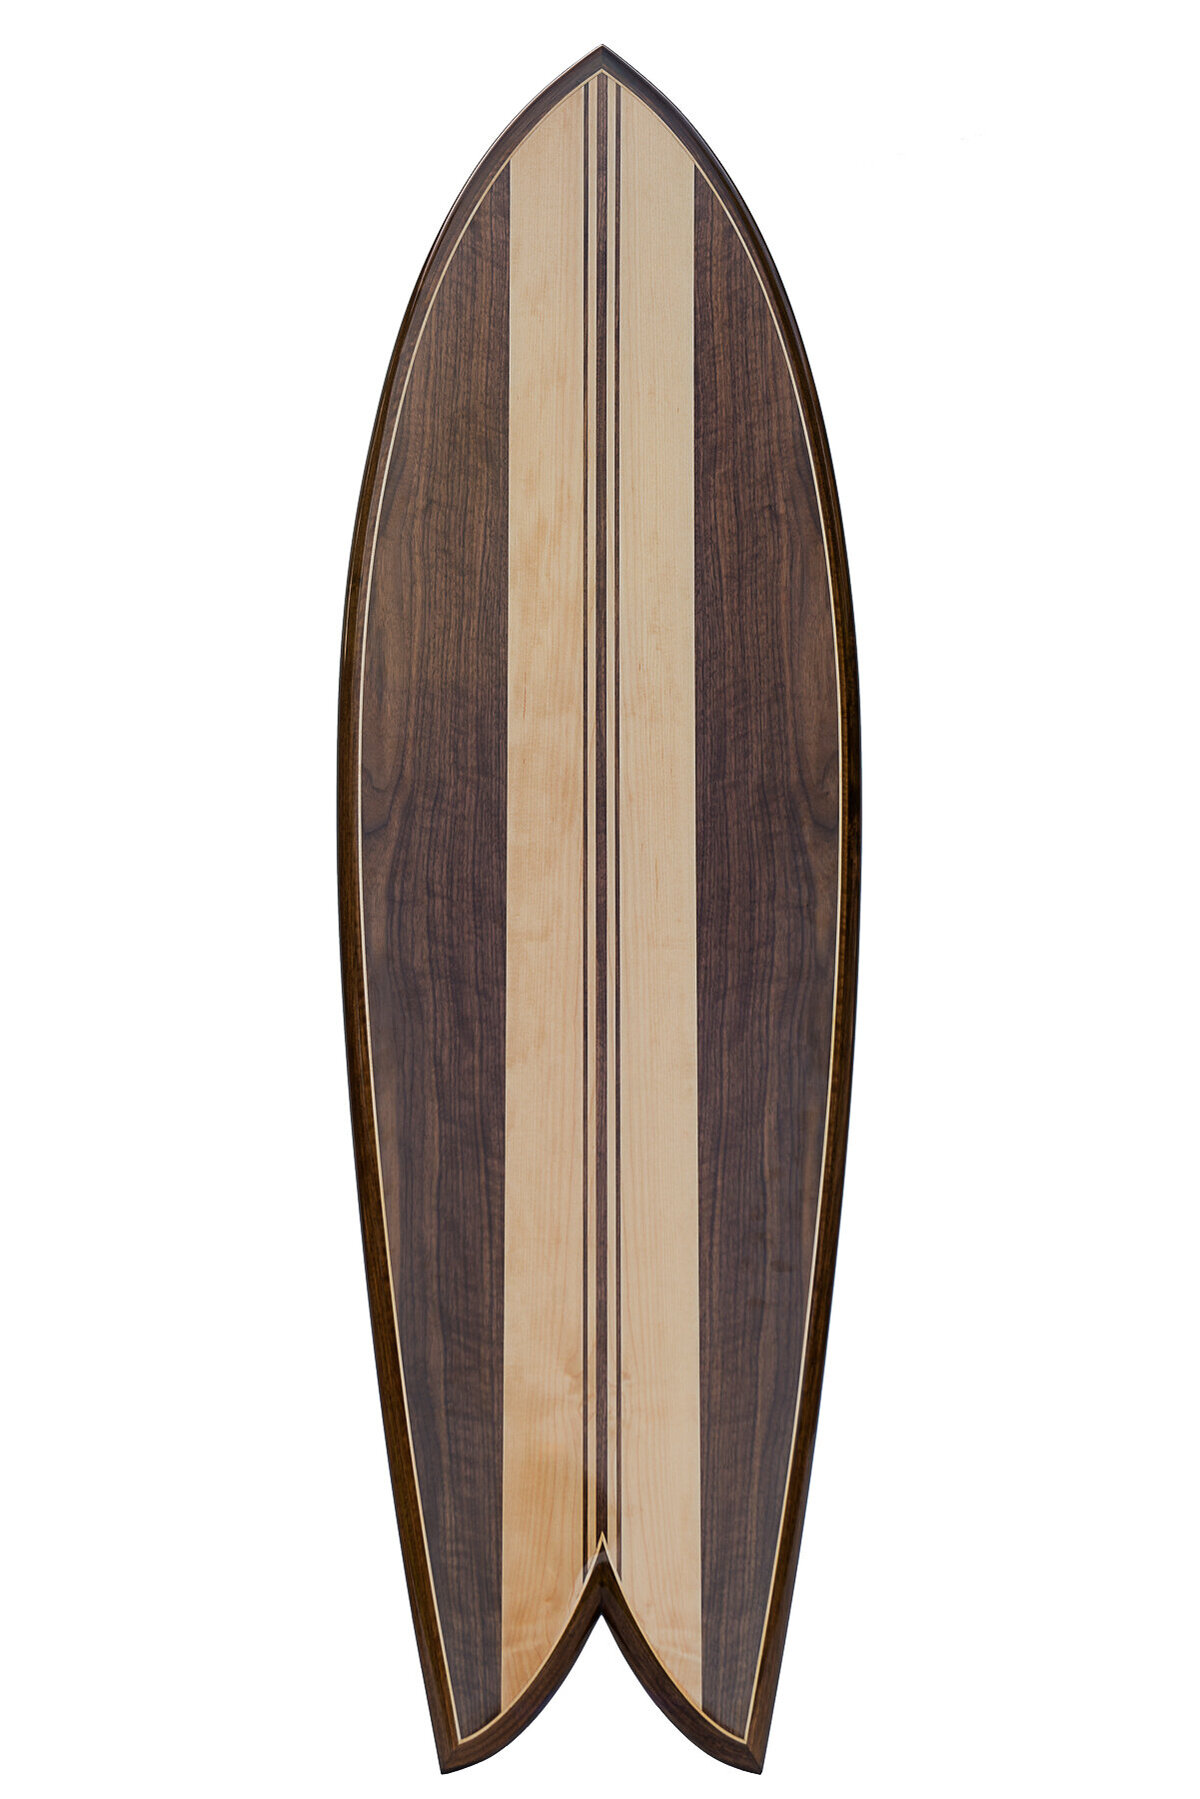 Red-Leaf-Sustainable-Surfboards-Gisborne-New-Zealand-Phil-Yeo-Photography-Videography-Commercial-4